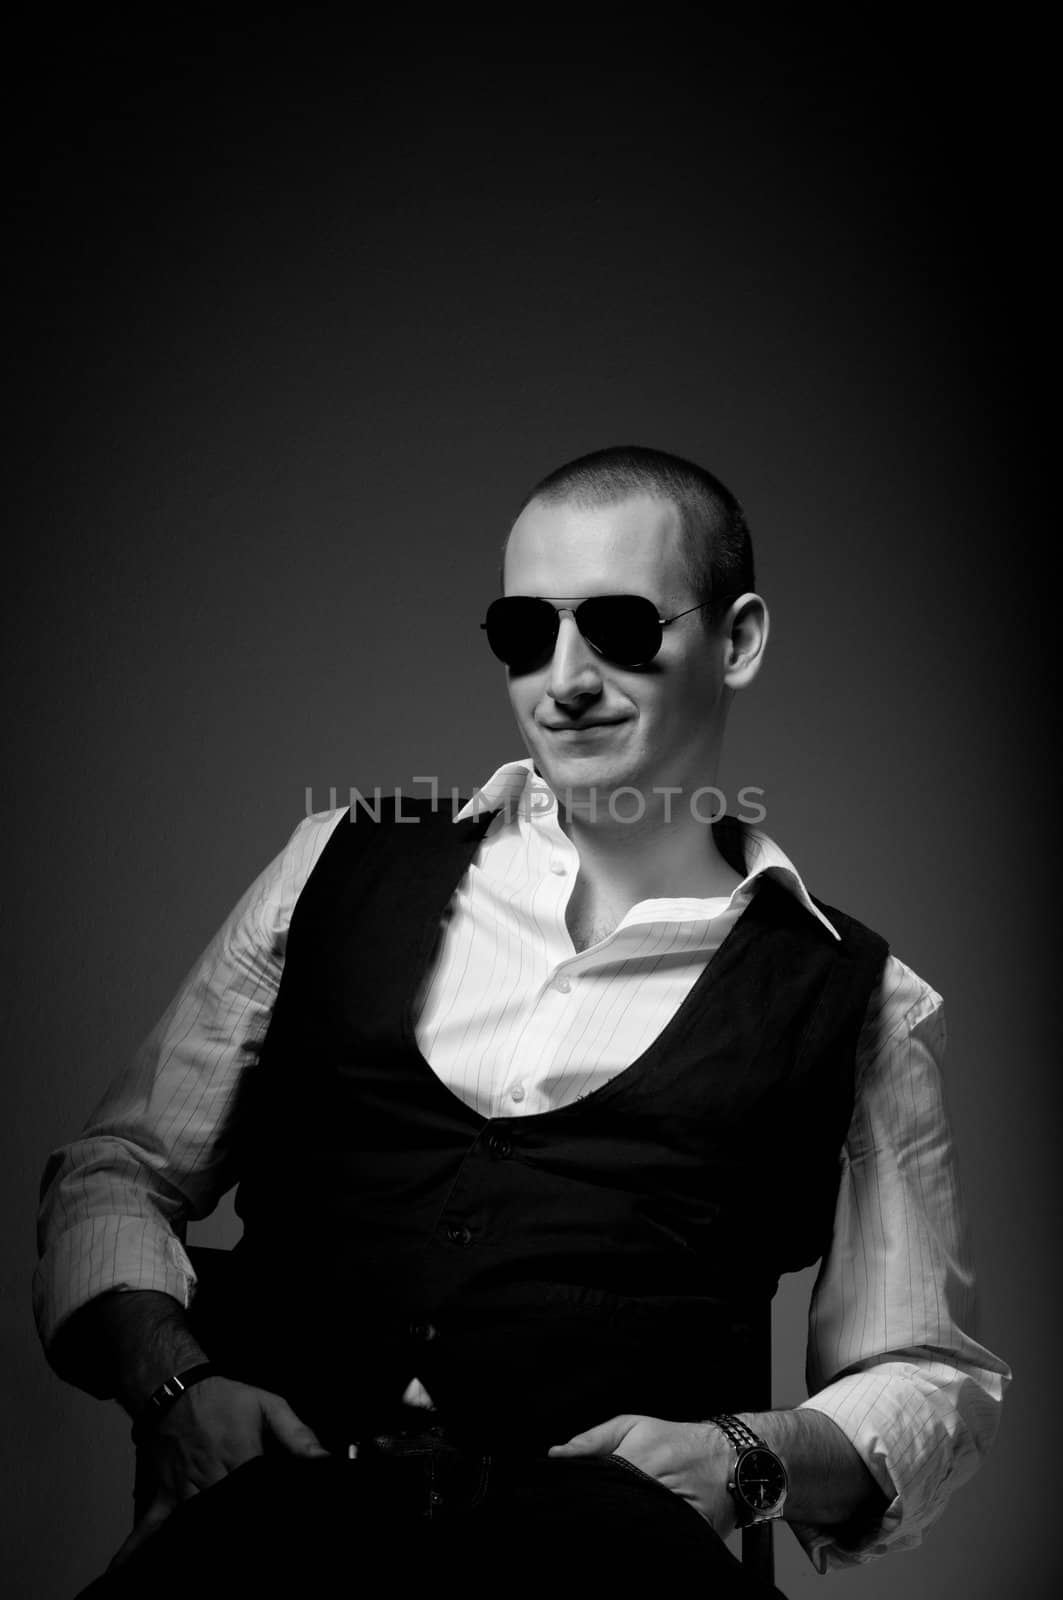 Portrait of a young man wearing sunglasses in black and white